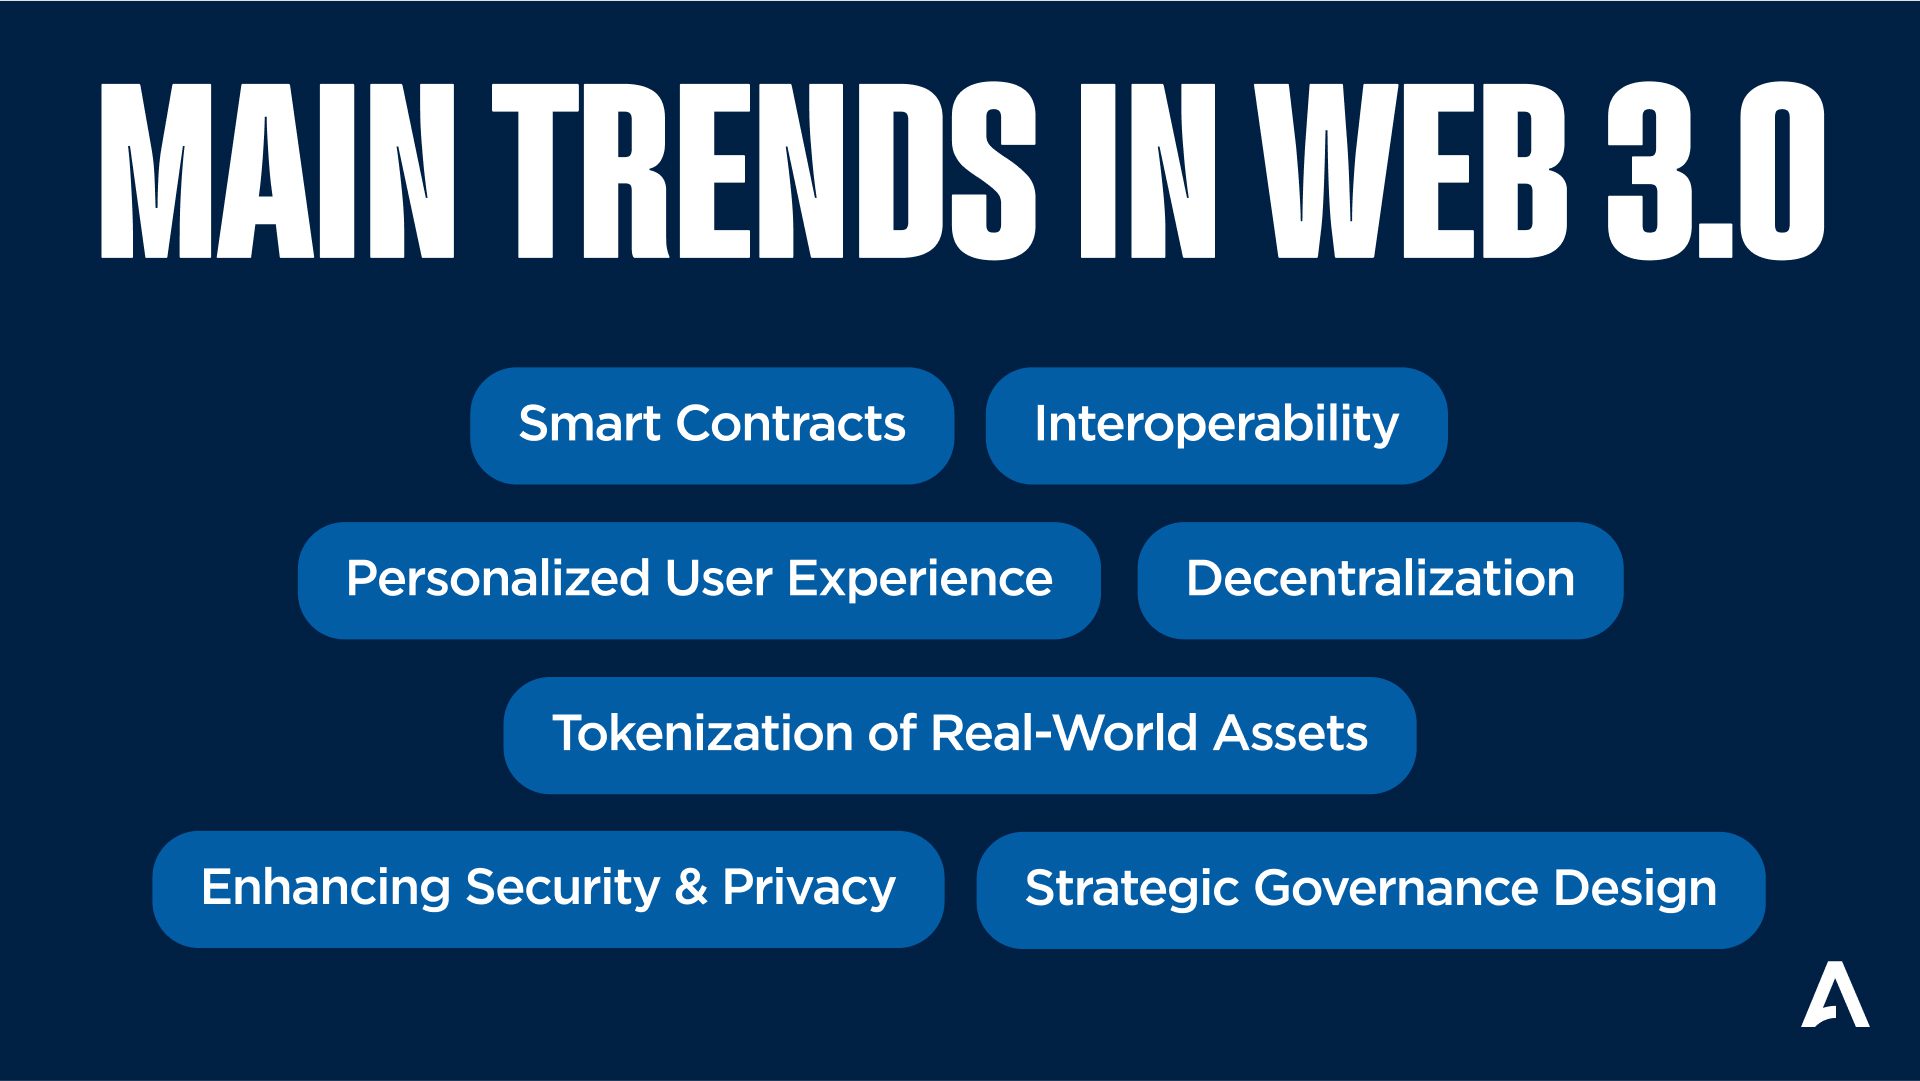 Main Trends in web 3.0